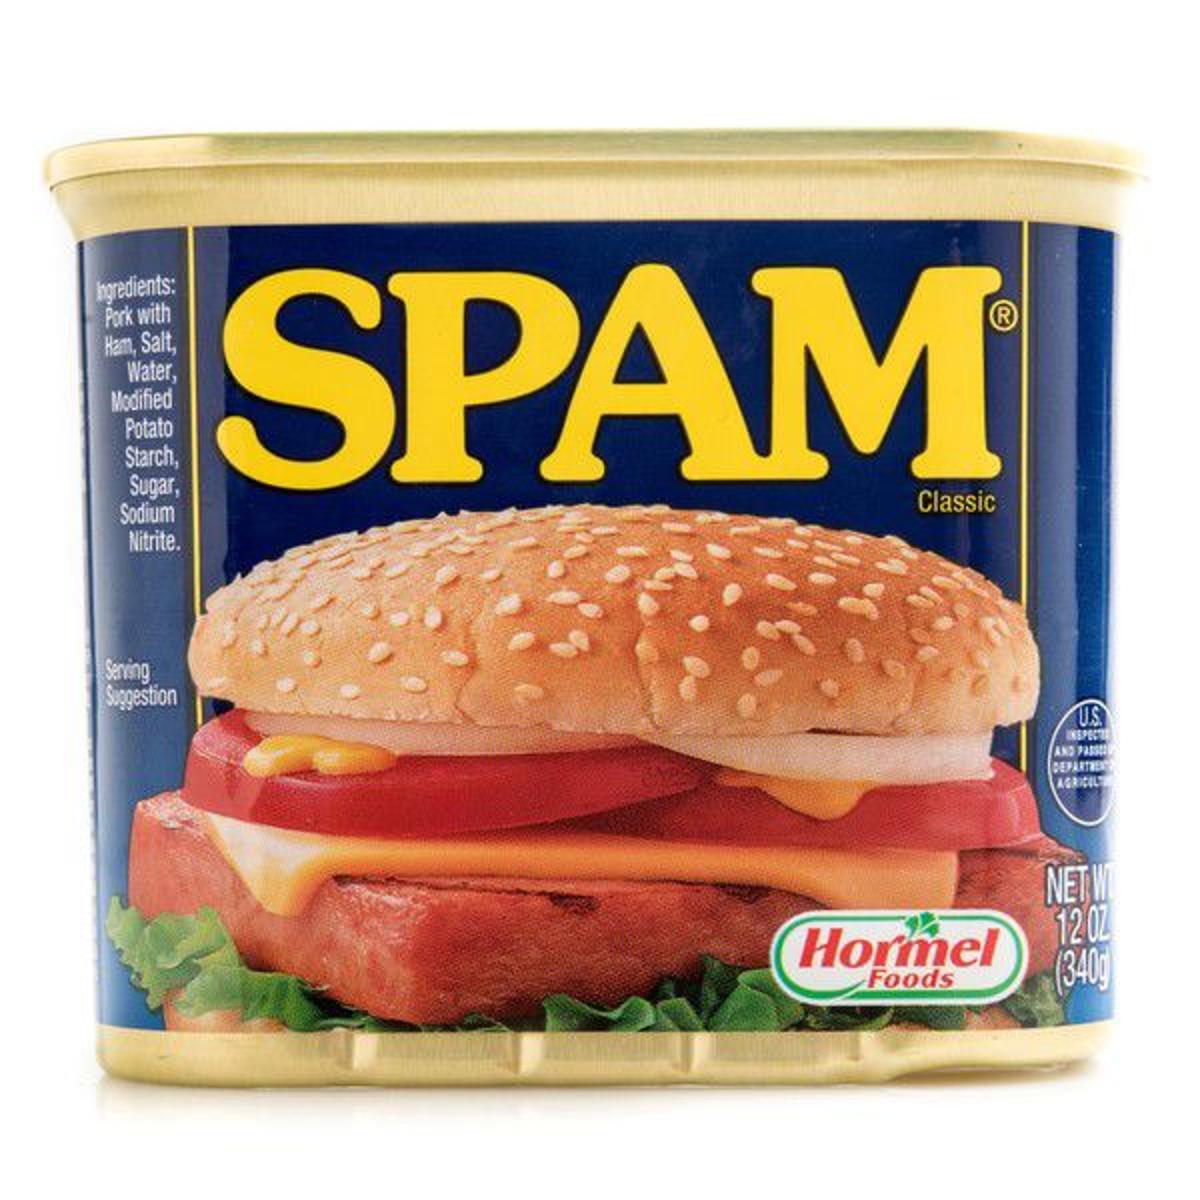 SPAM® Brand Is Giving Away Over P3M In Cash